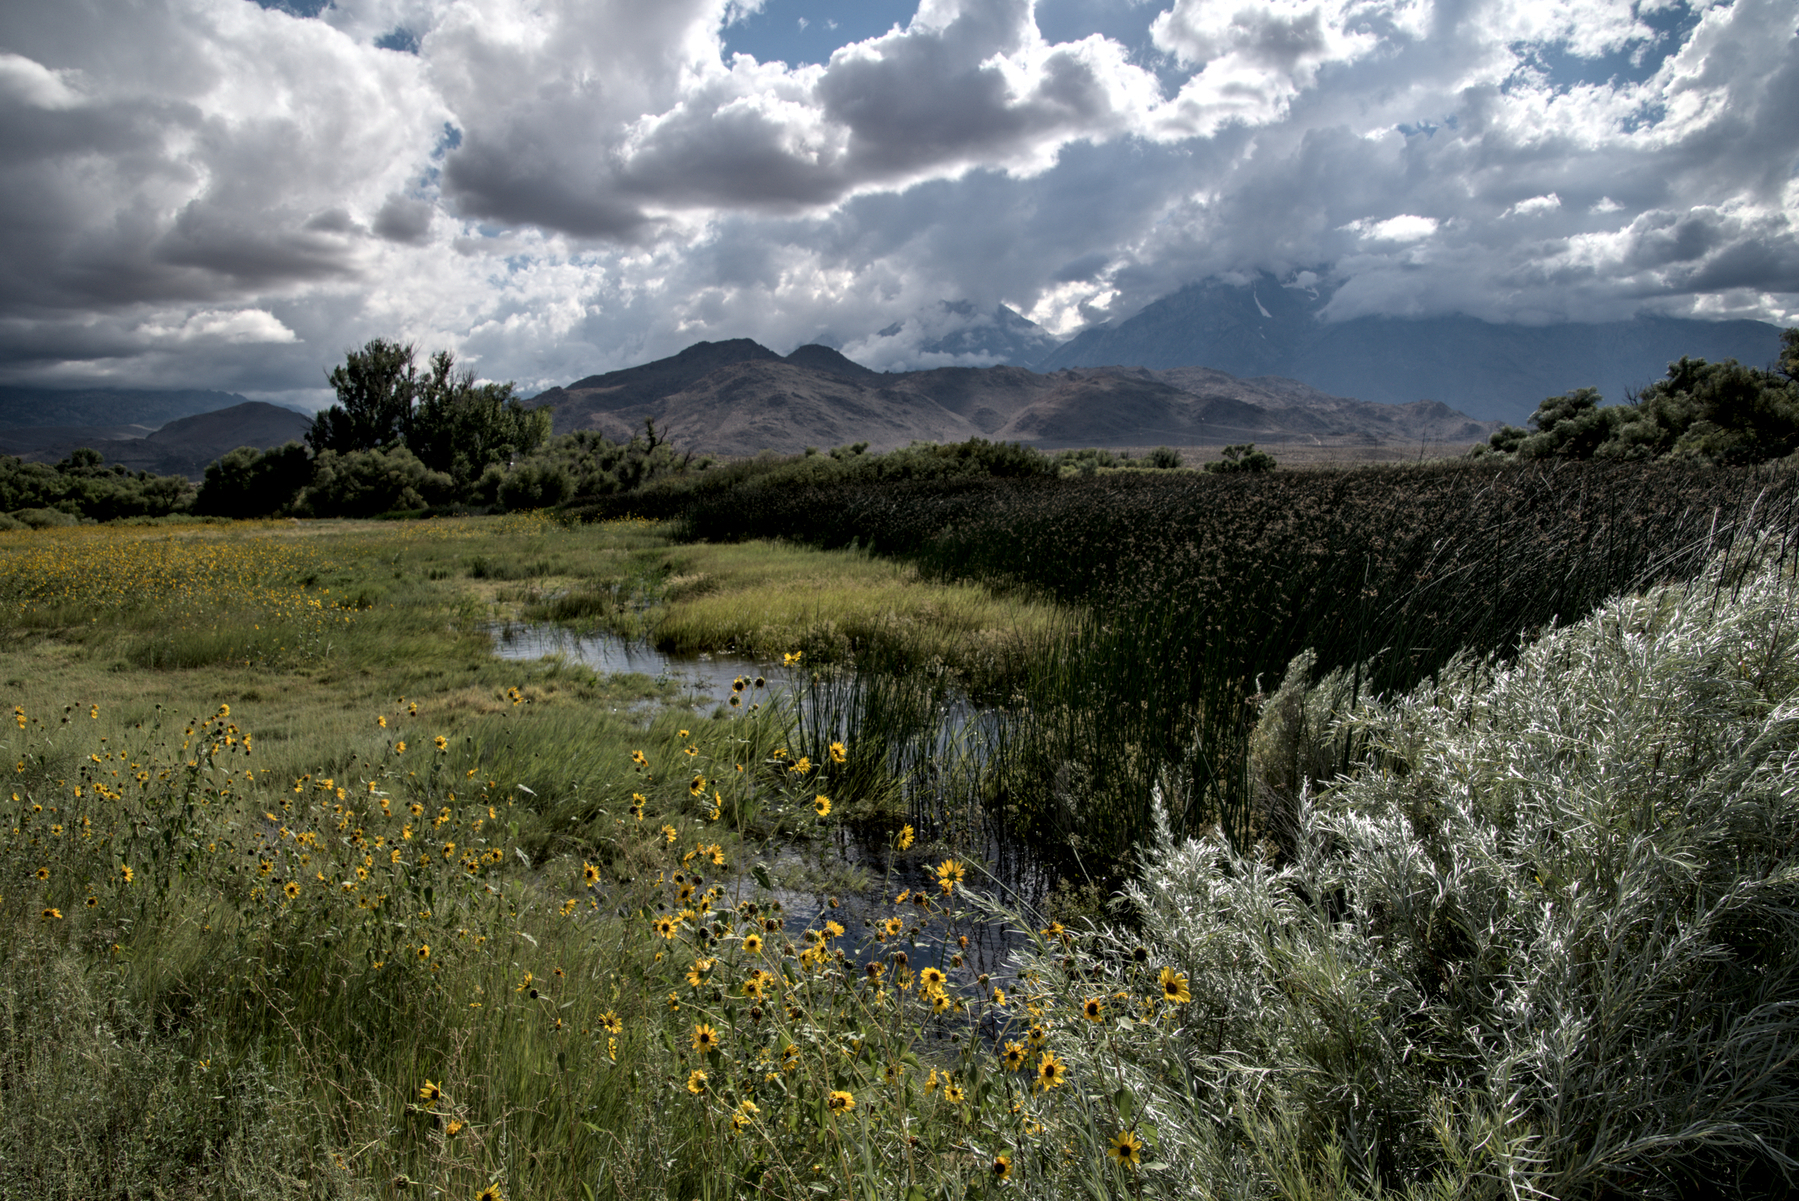 Sunflowers growing along the banks of a creek wandering through grass and reeds, brown foothills in the distance, with big mountains behind obscured by clouds. 